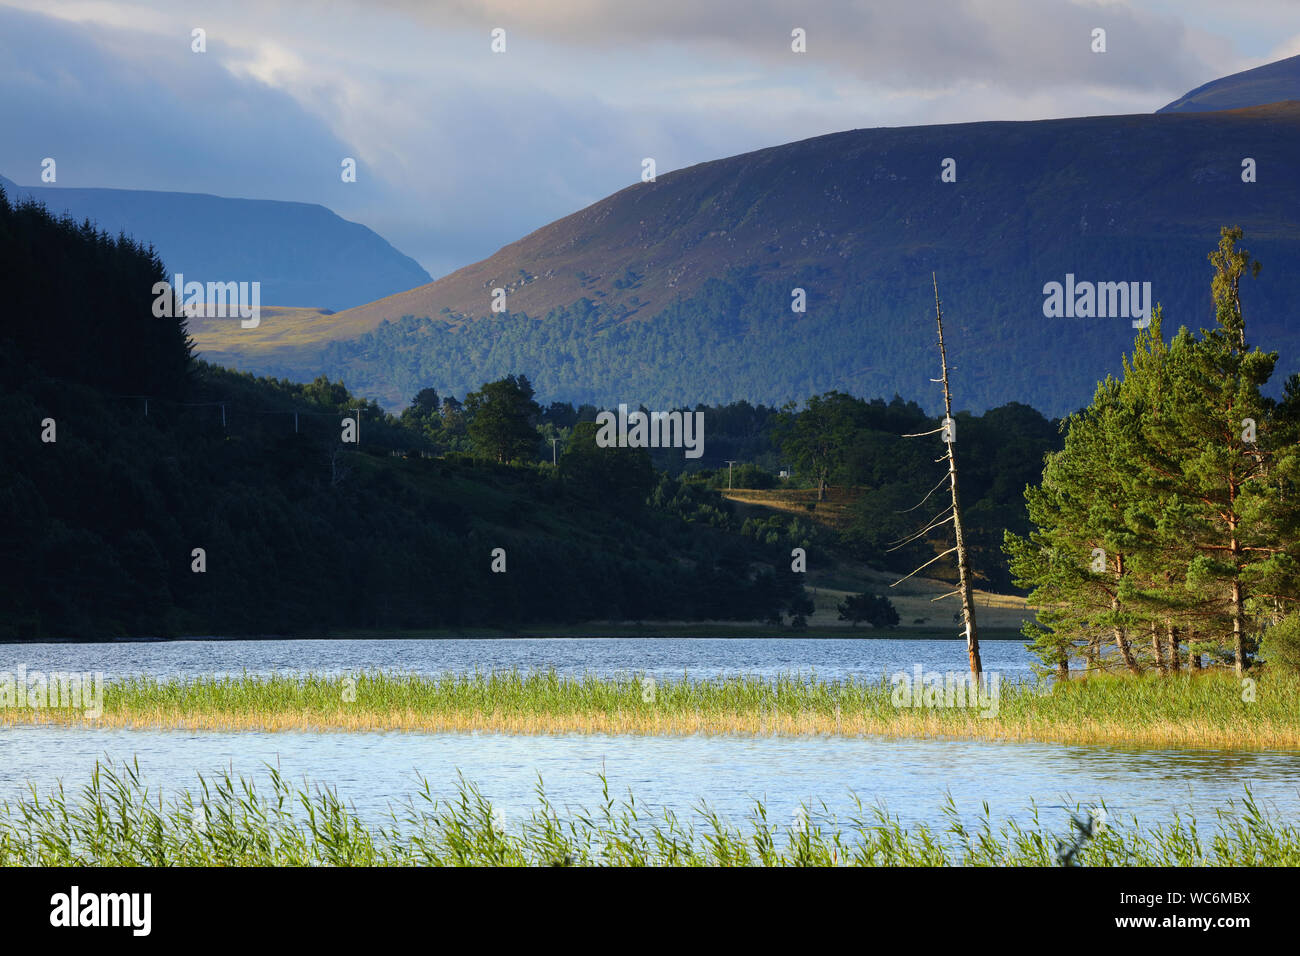 Loch Pityoulish vicino a Aviemore, Cairngorms National Park, Scozia Foto Stock